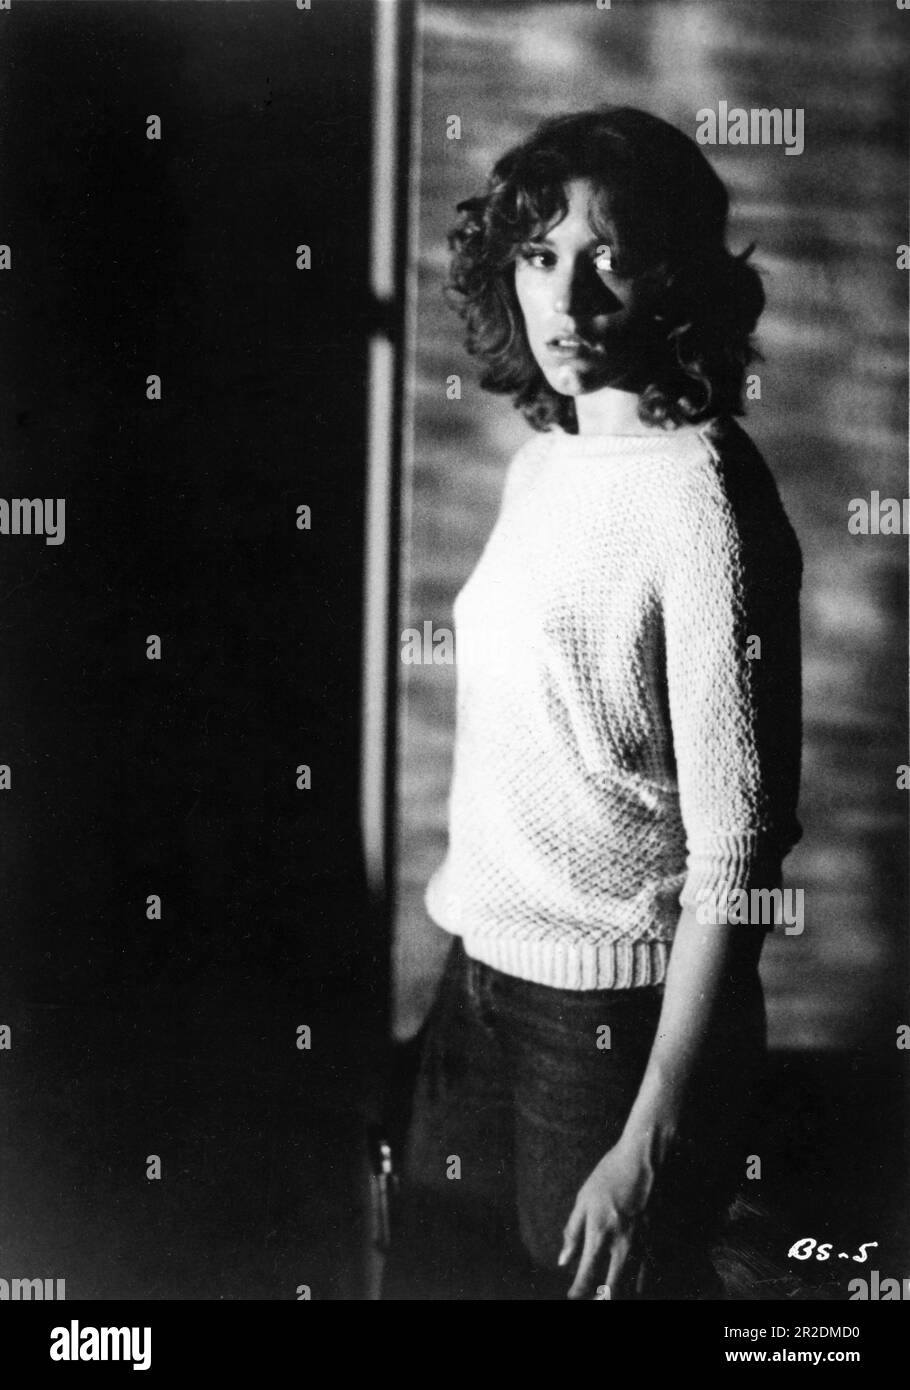 FRANCES McDORMAND in BLOOD SIMPLE 1984 directors / writers JOEL COEN and ETHAN COEN music Carter Burwell River Road Productions / Foxton Entertainment / Circle Films Stock Photo